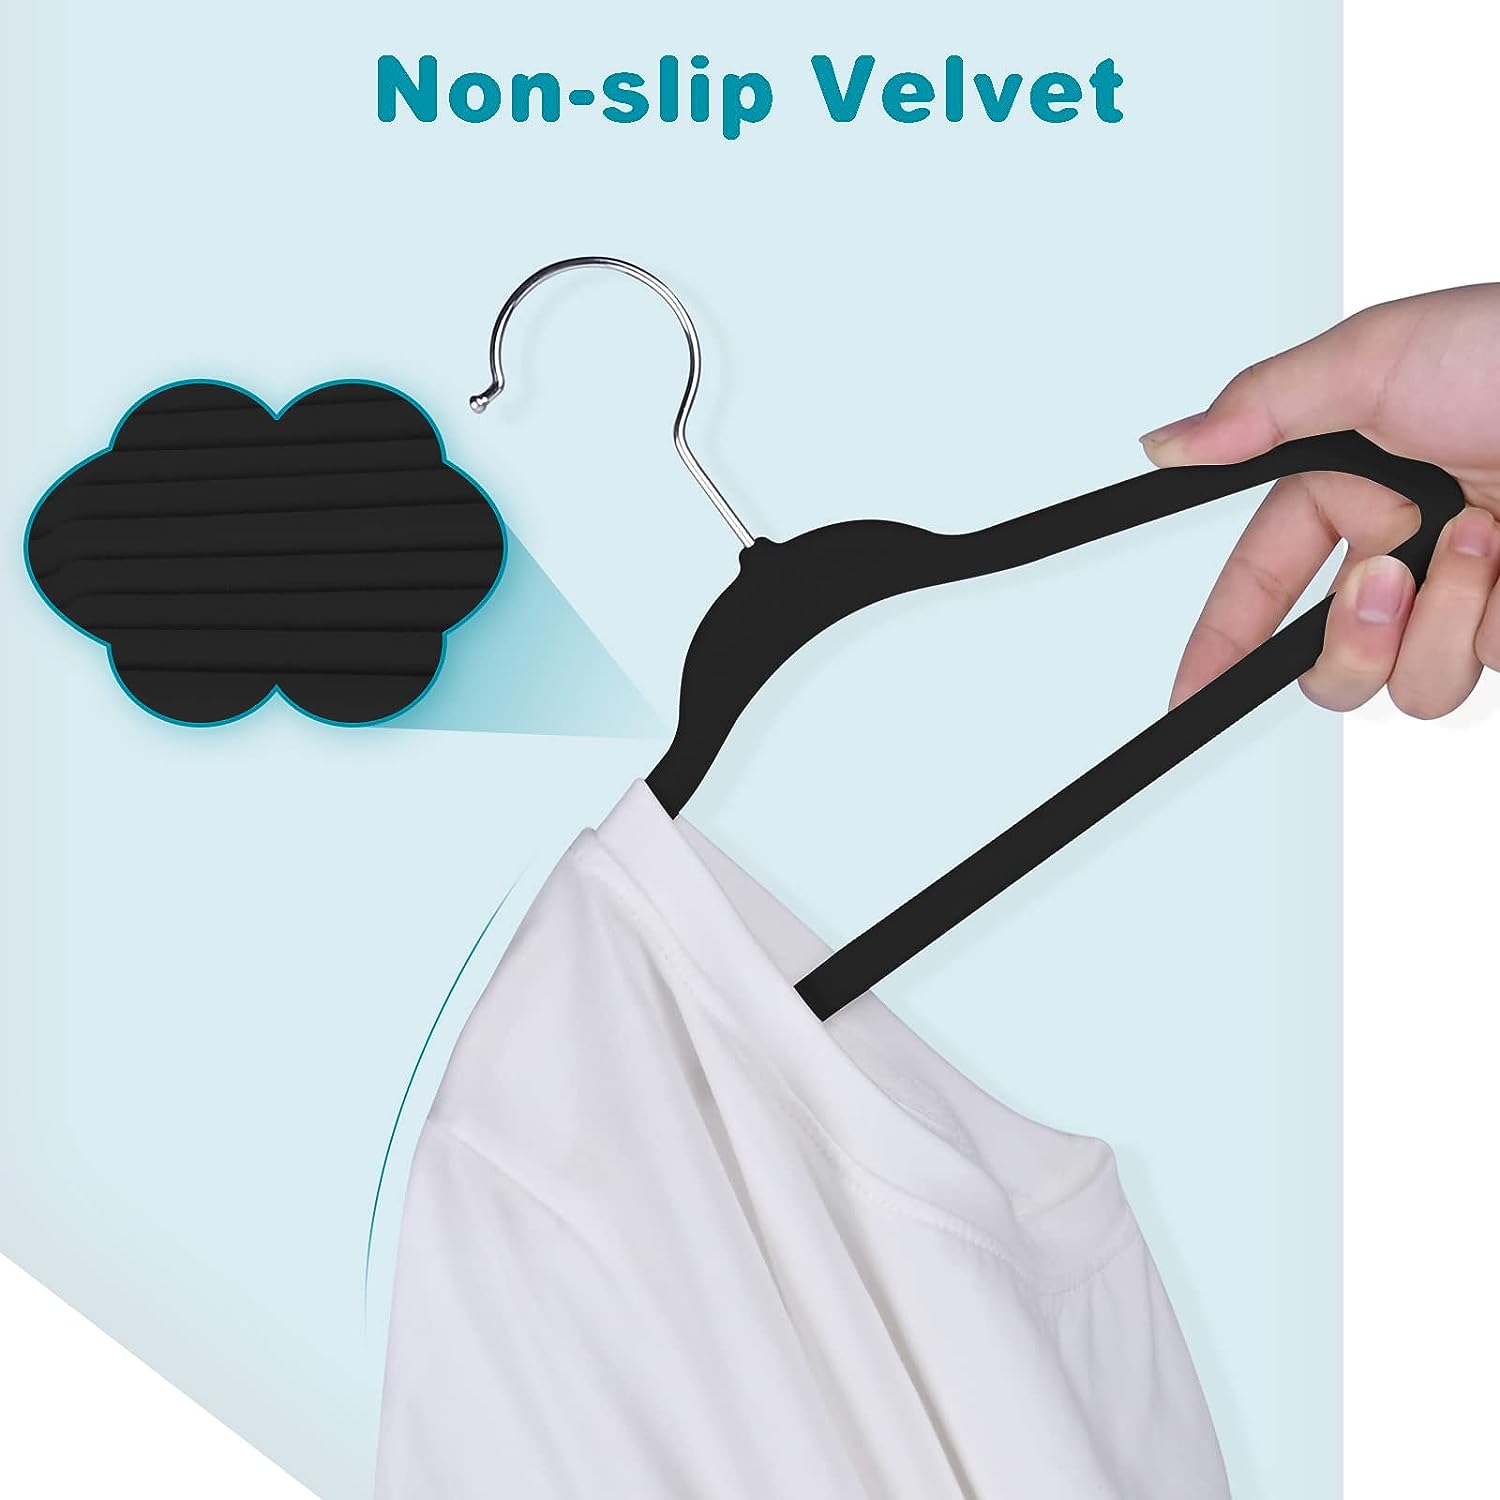 BAGAIL Velvet Hangers,Non Slip Notched Coat/Suit Hangers,Heavy Duty Space  Saving Clothes Hangers with 360 Degree Swivel Hook (Teal, 50 Pack)